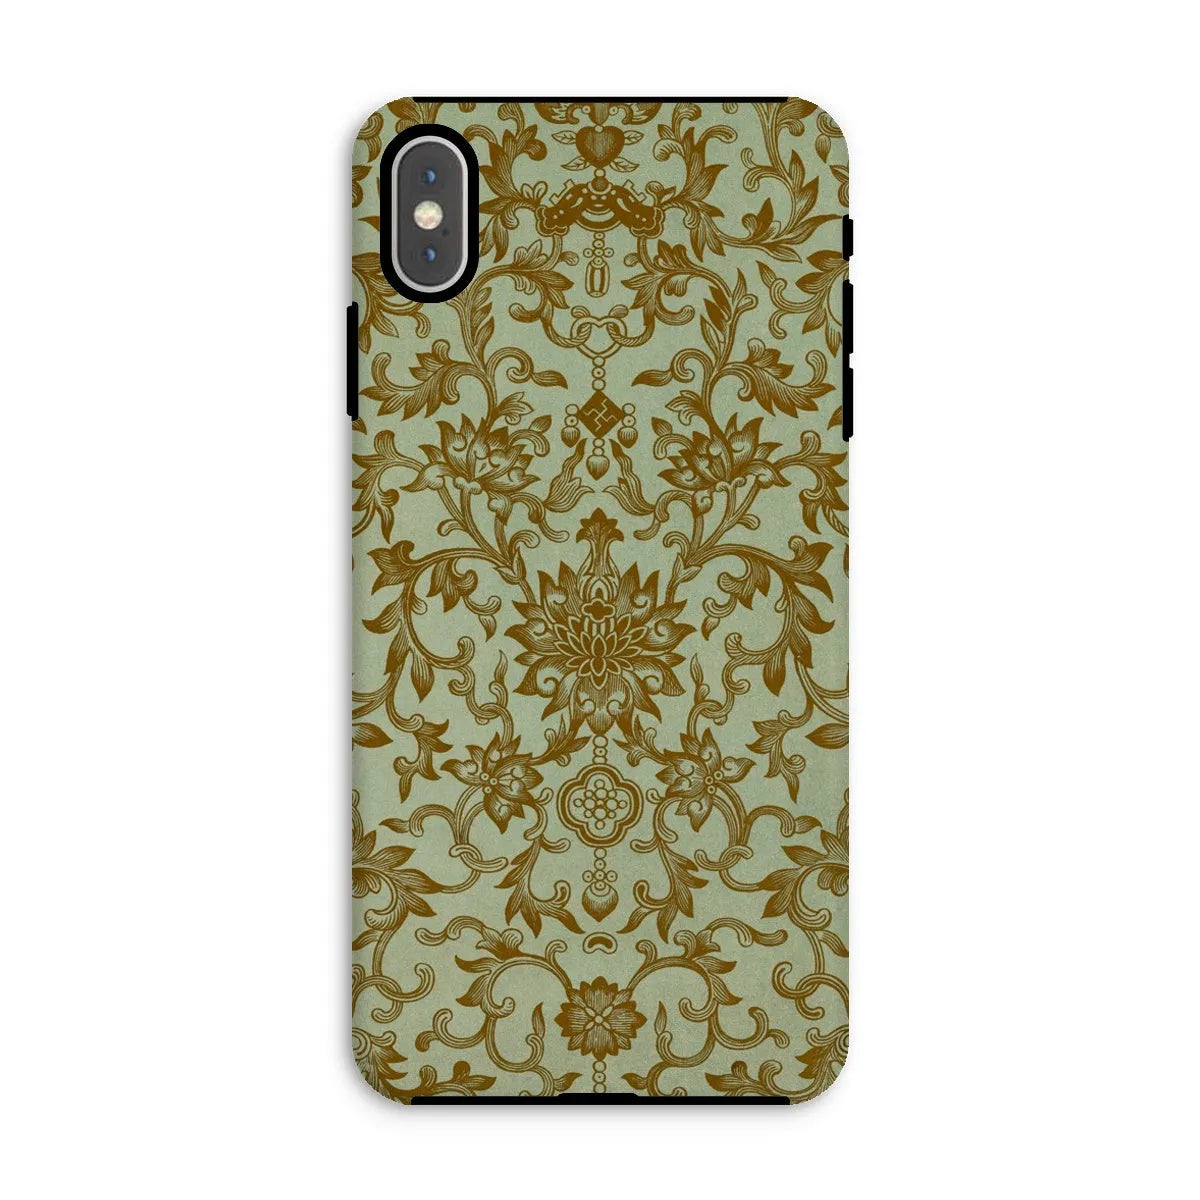 Earthy Chinese Floral Art Pattern Phone Case - Owen Jones - Iphone Xs Max / Matte - Mobile Phone Cases - Aesthetic Art